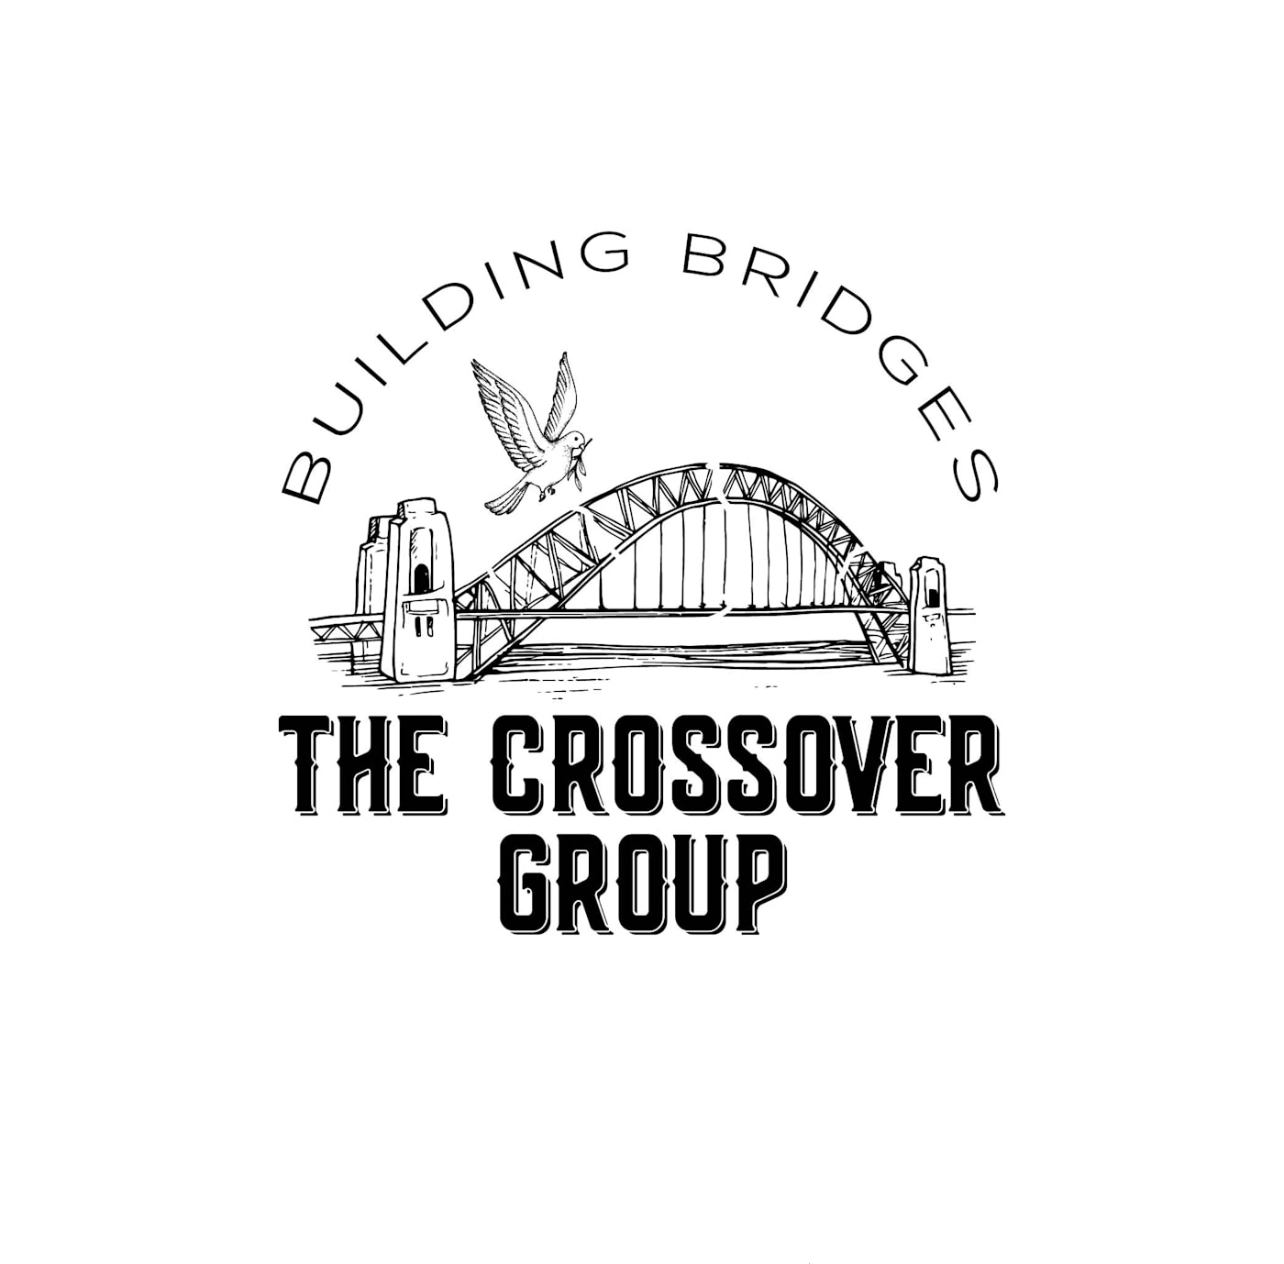 The Crossover group